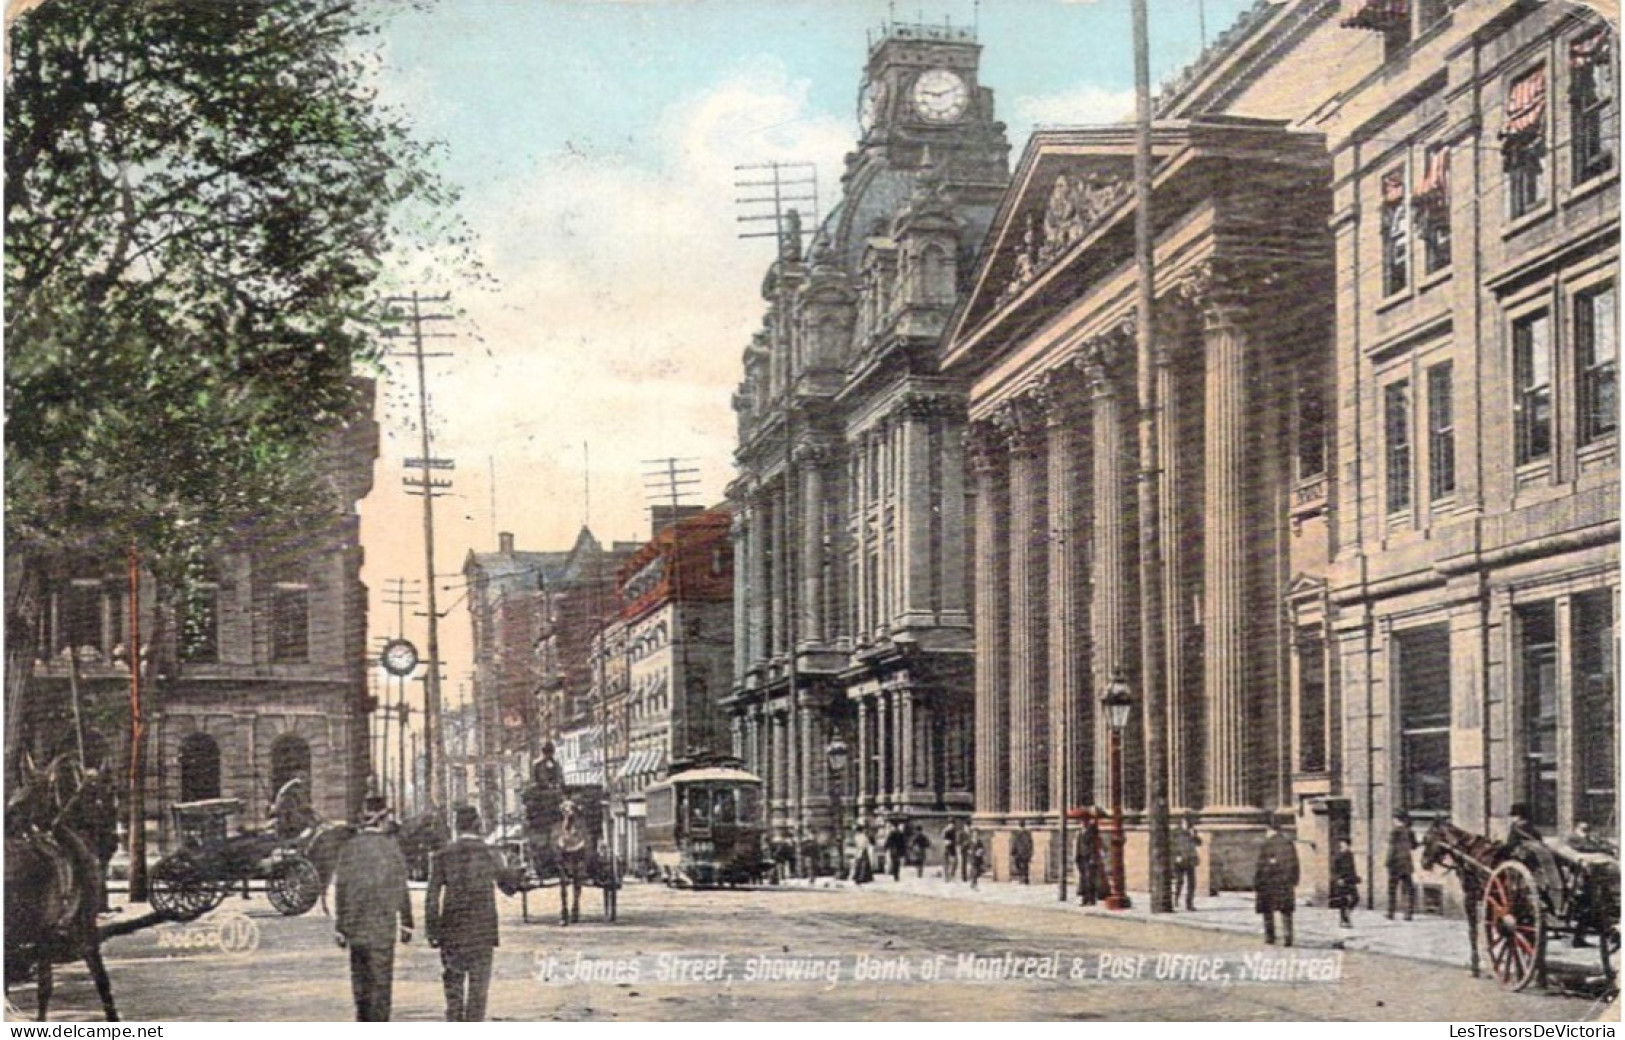 CANADA - Quebec - Montreal - St. James Street - Showing Bank Of Montreal & Post Office - Carte Postale Ancienne - Montreal